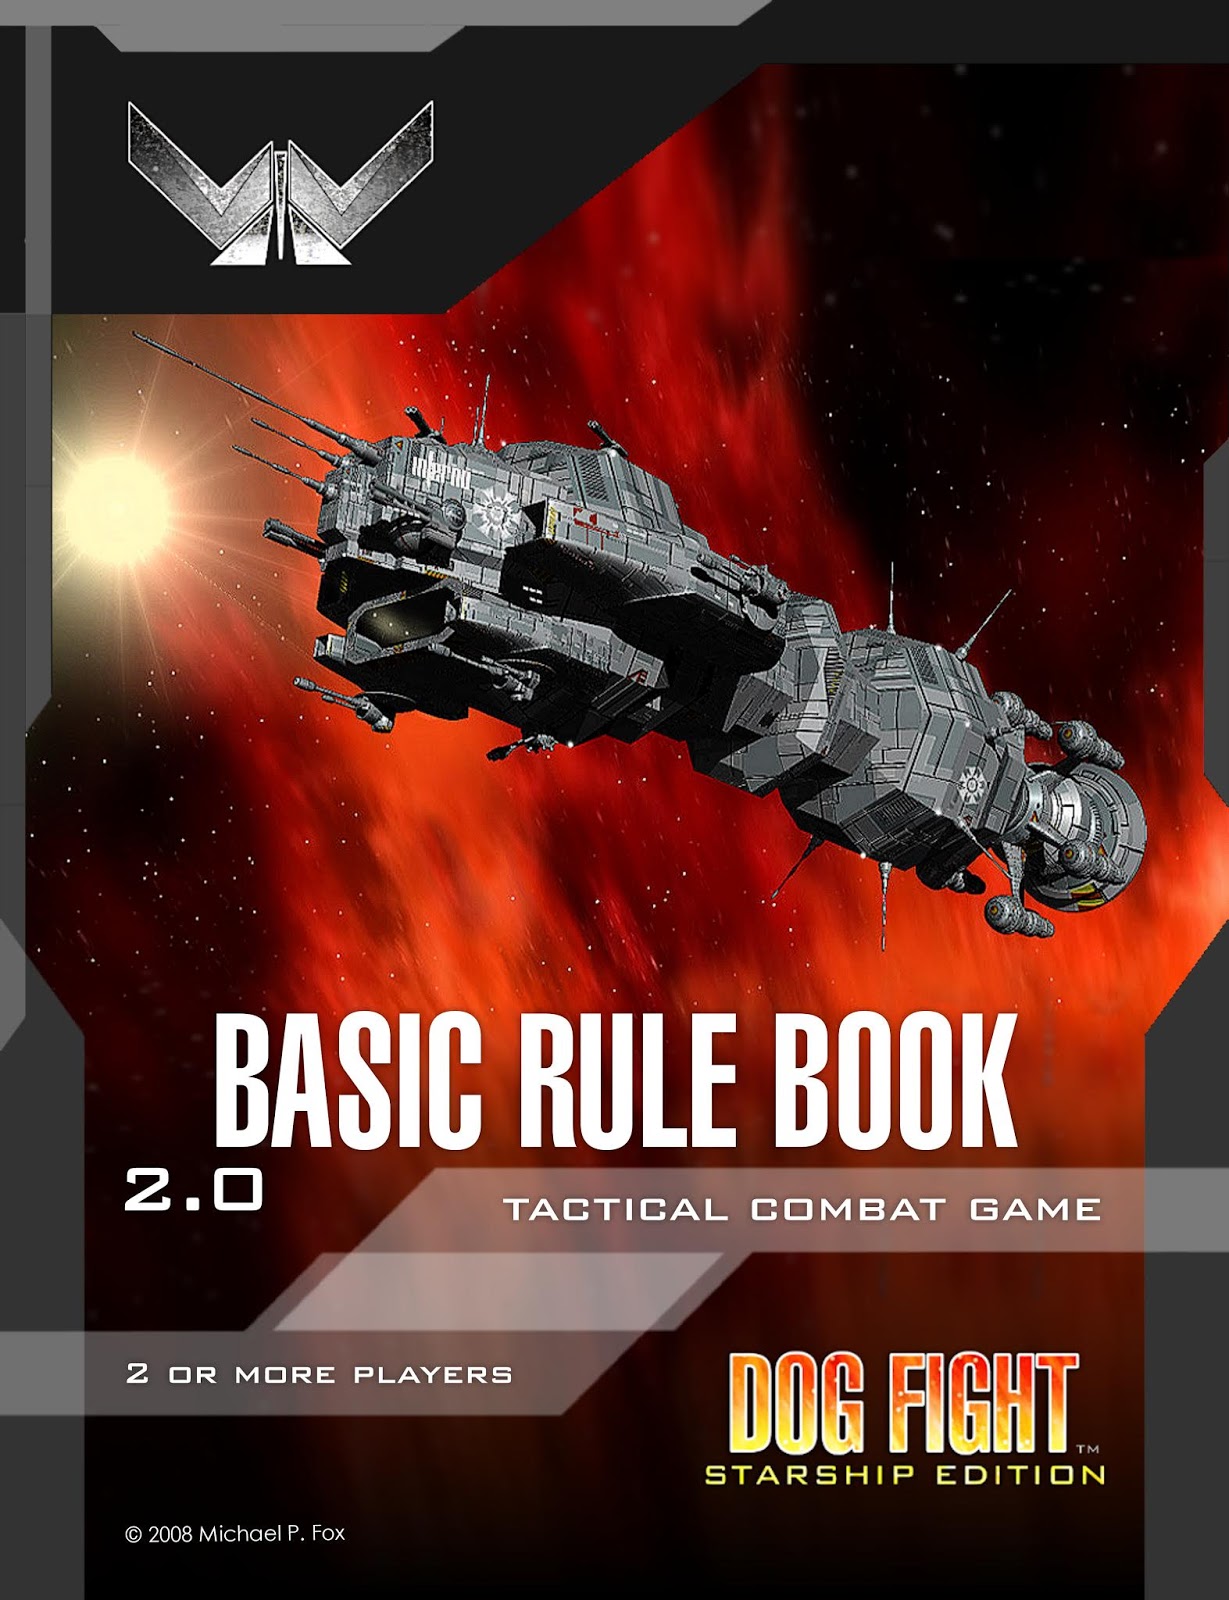 Dog Fight: Starship Edition official rule book